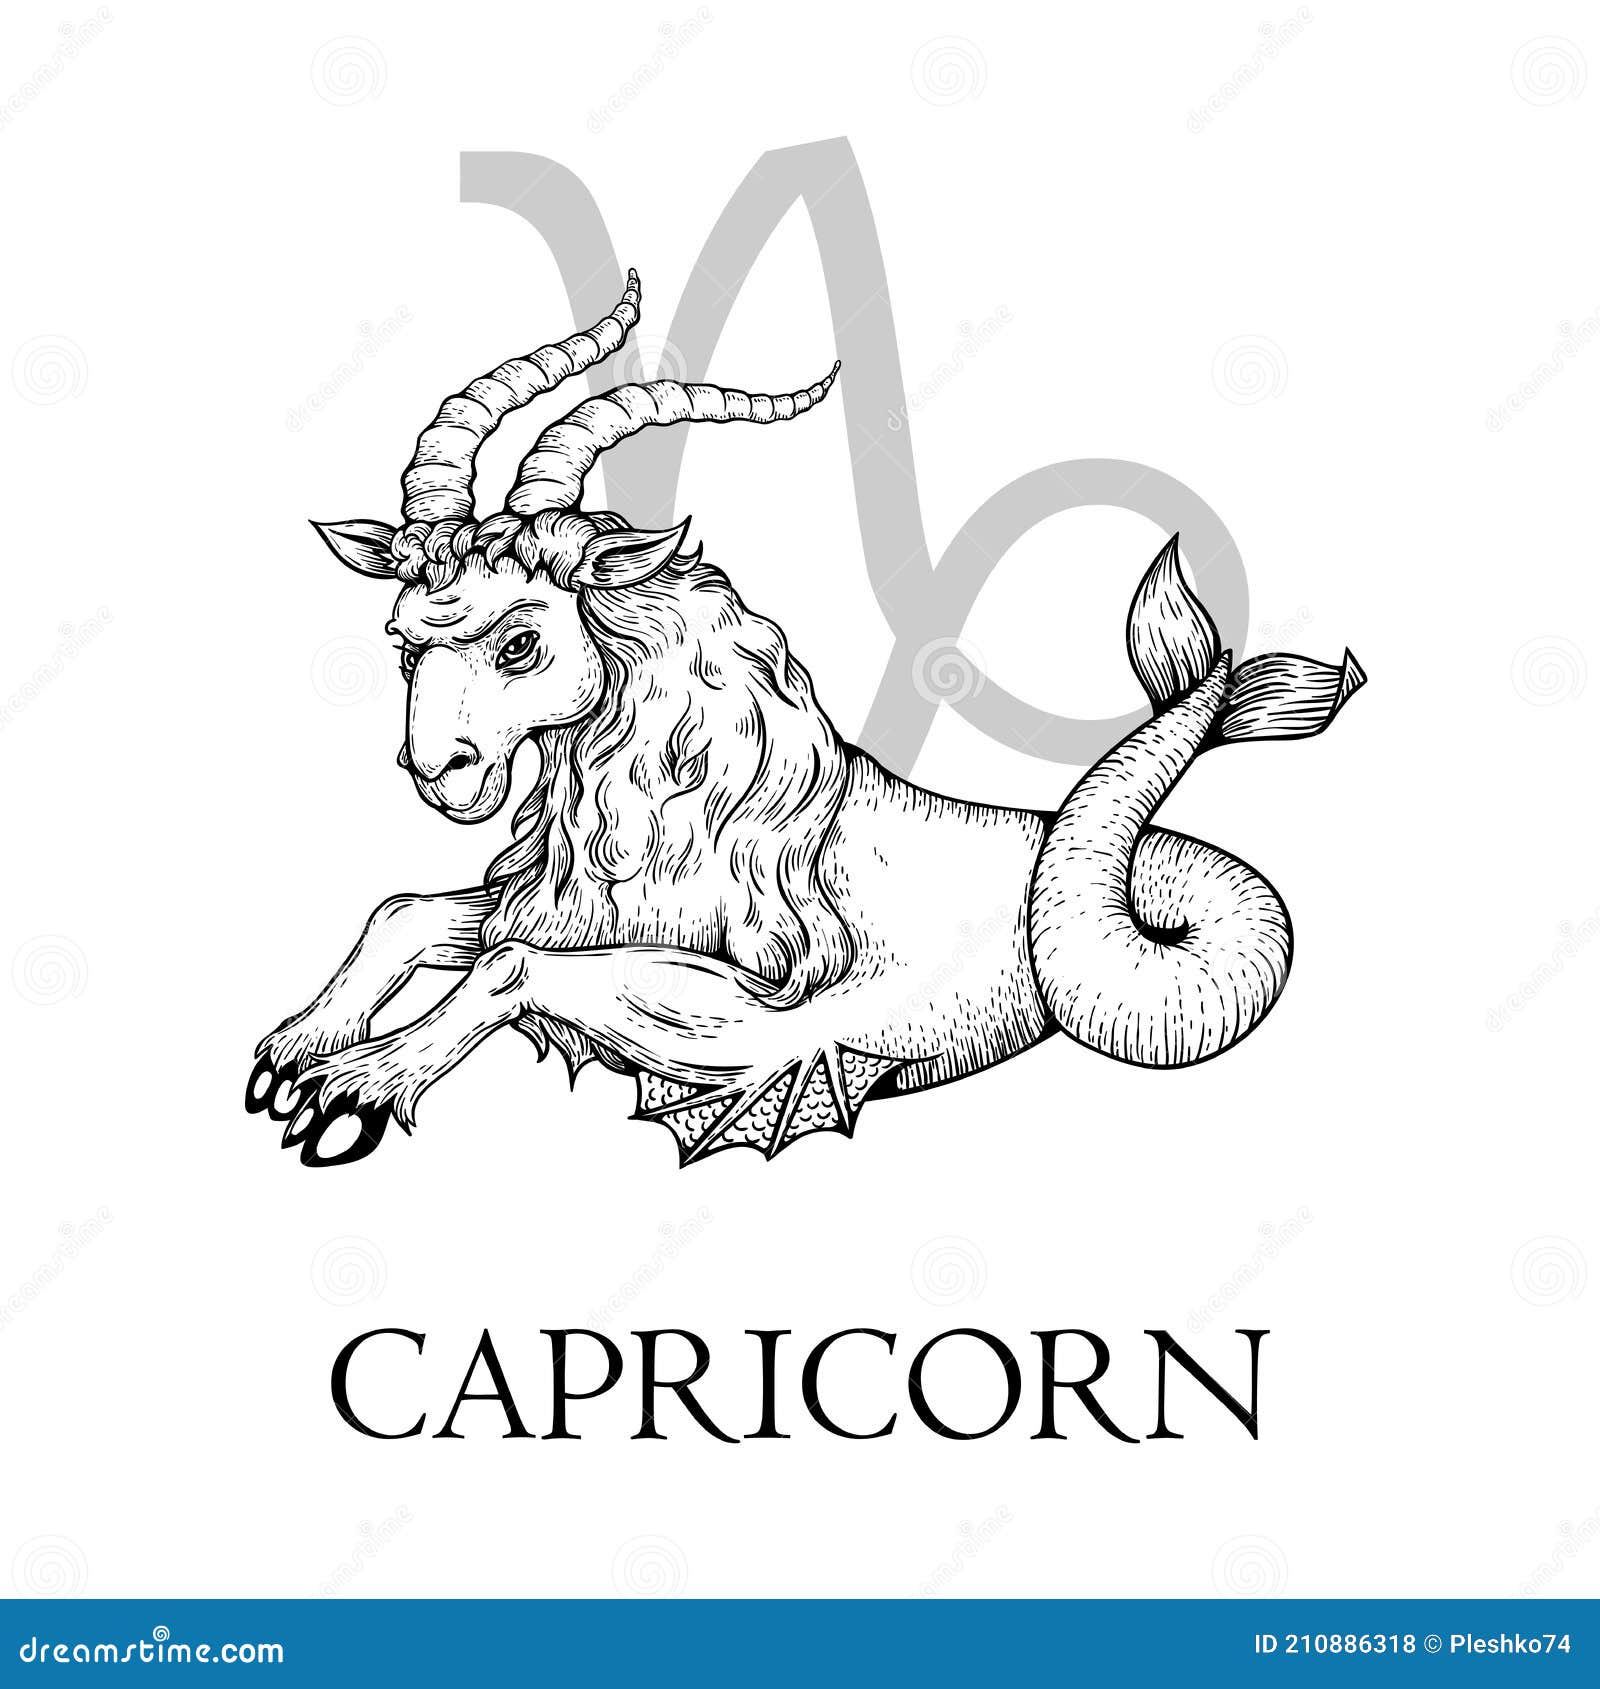 Hand Drawn Capricorn. Zodiac Symbol in Vintage Gravure or Sketch Style.  Male Goat or Mouflon Mystical Animal with Fish Tail Stock Vector -  Illustration of astronomy, capricorn: 210886318